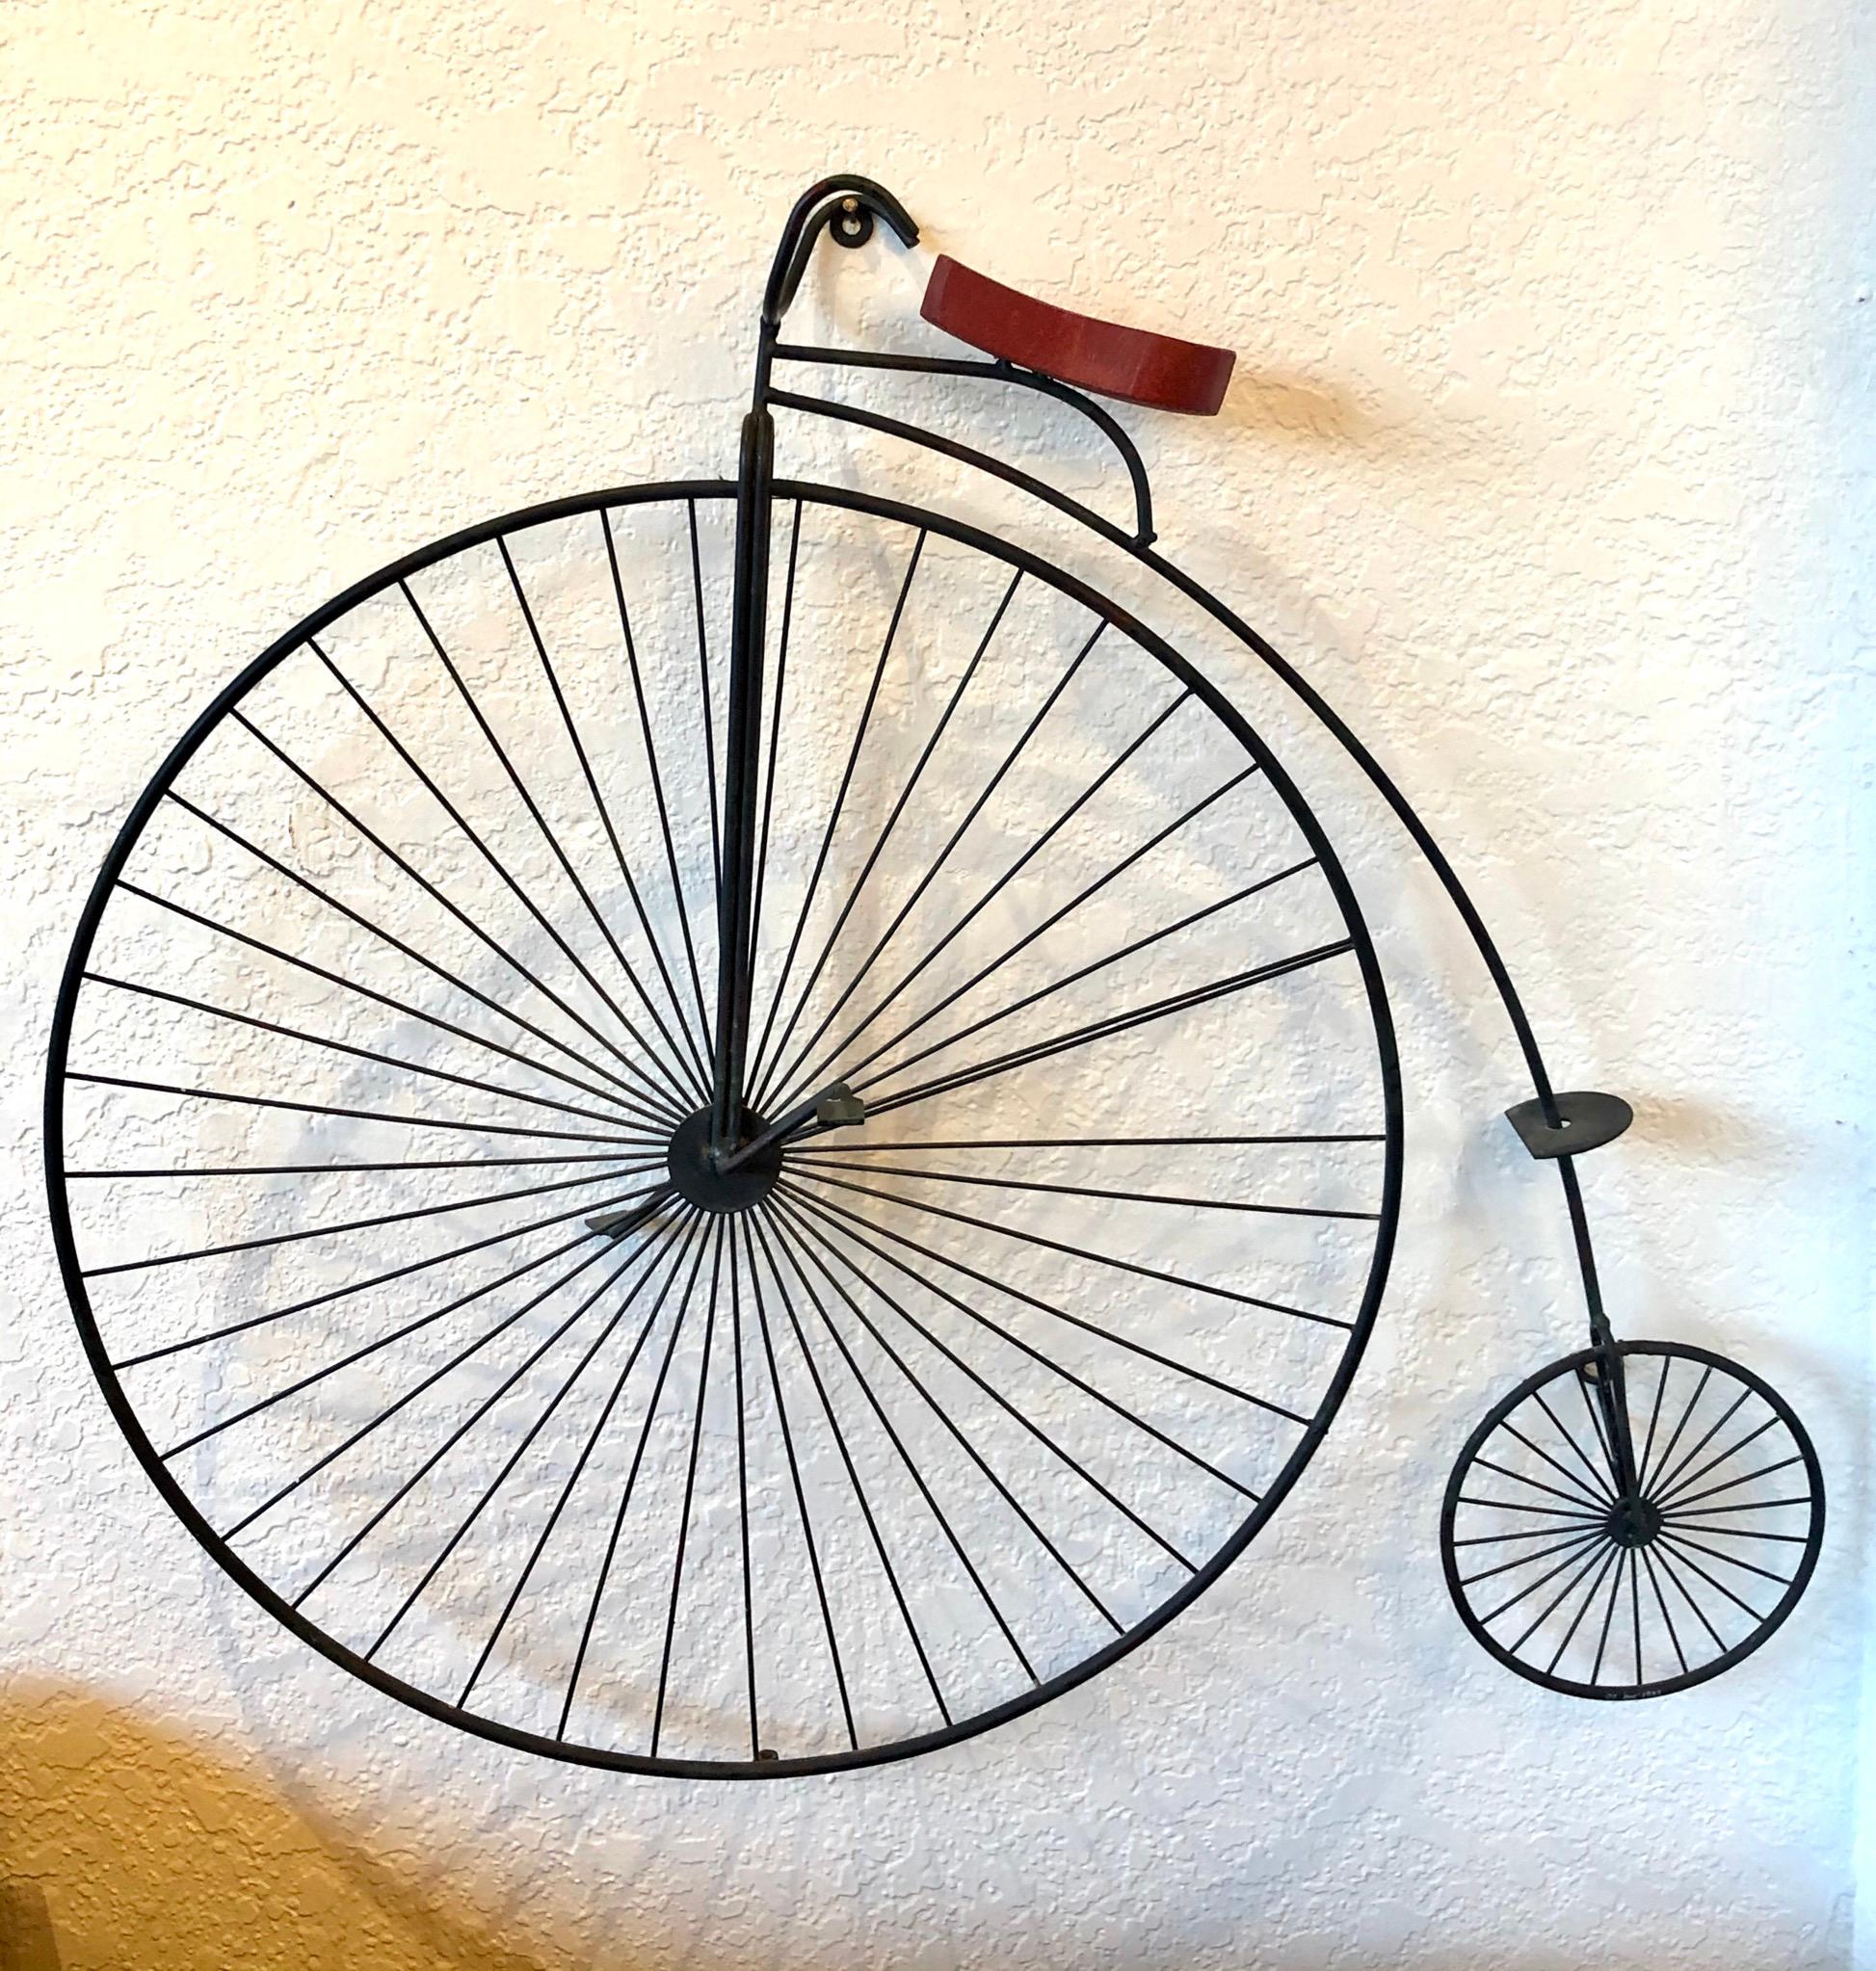 Whimsical Curtis Jere signed metal bicycle with red painted wood seat wall sculpture 1982, great wall decor signed and dated.